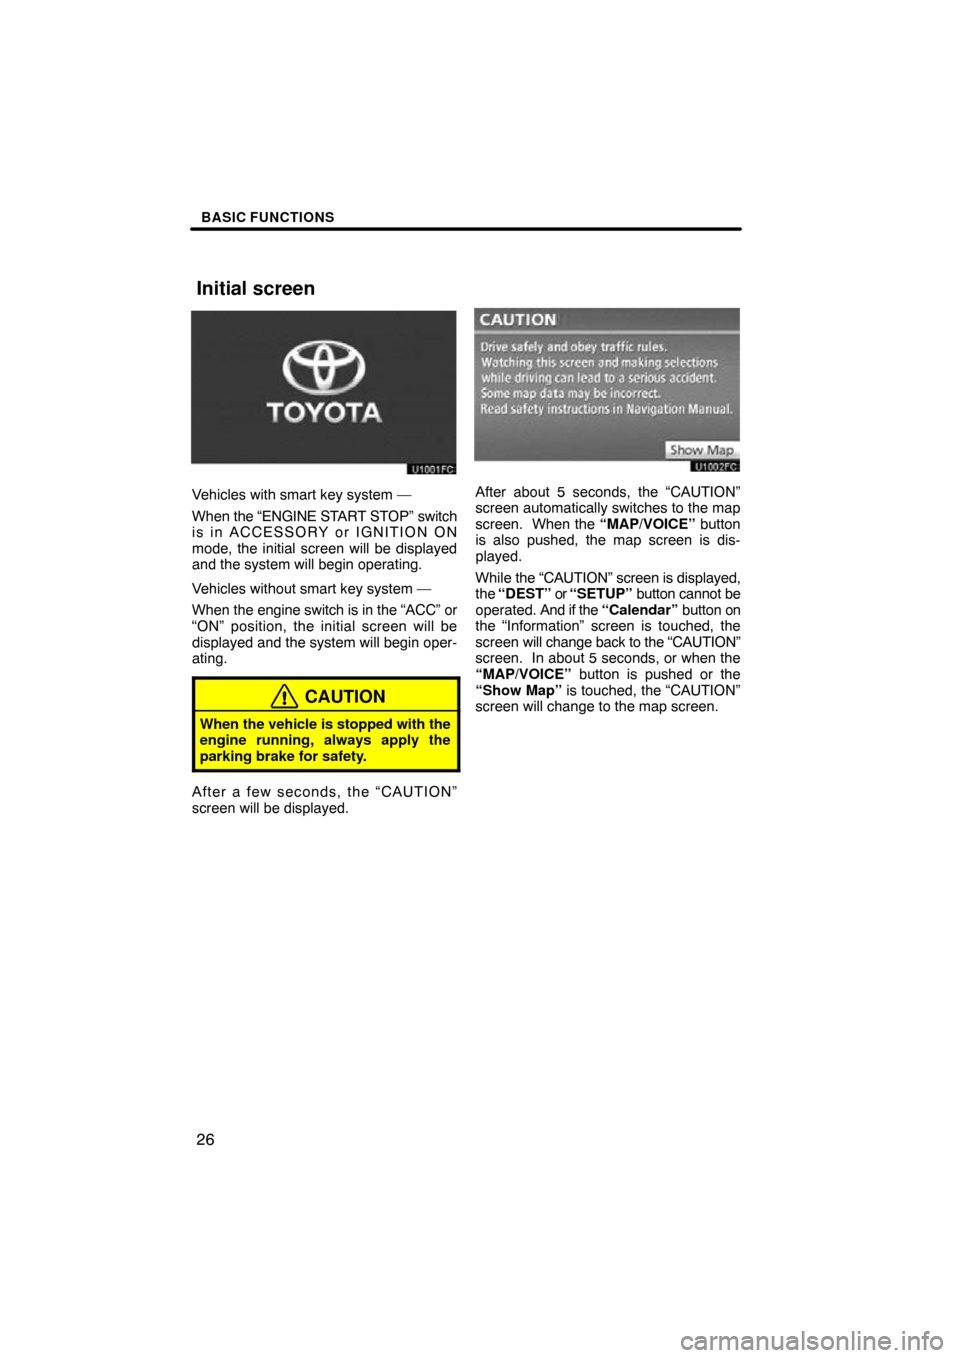 TOYOTA HIGHLANDER 2011 XU40 / 2.G Navigation Manual BASIC FUNCTIONS
26
Vehicles with smart key system —
When the “ENGINE START STOP” switch
is in ACCESSORY or IGNITION ON
mode, the initial screen will be displayed
and the system will begin operat